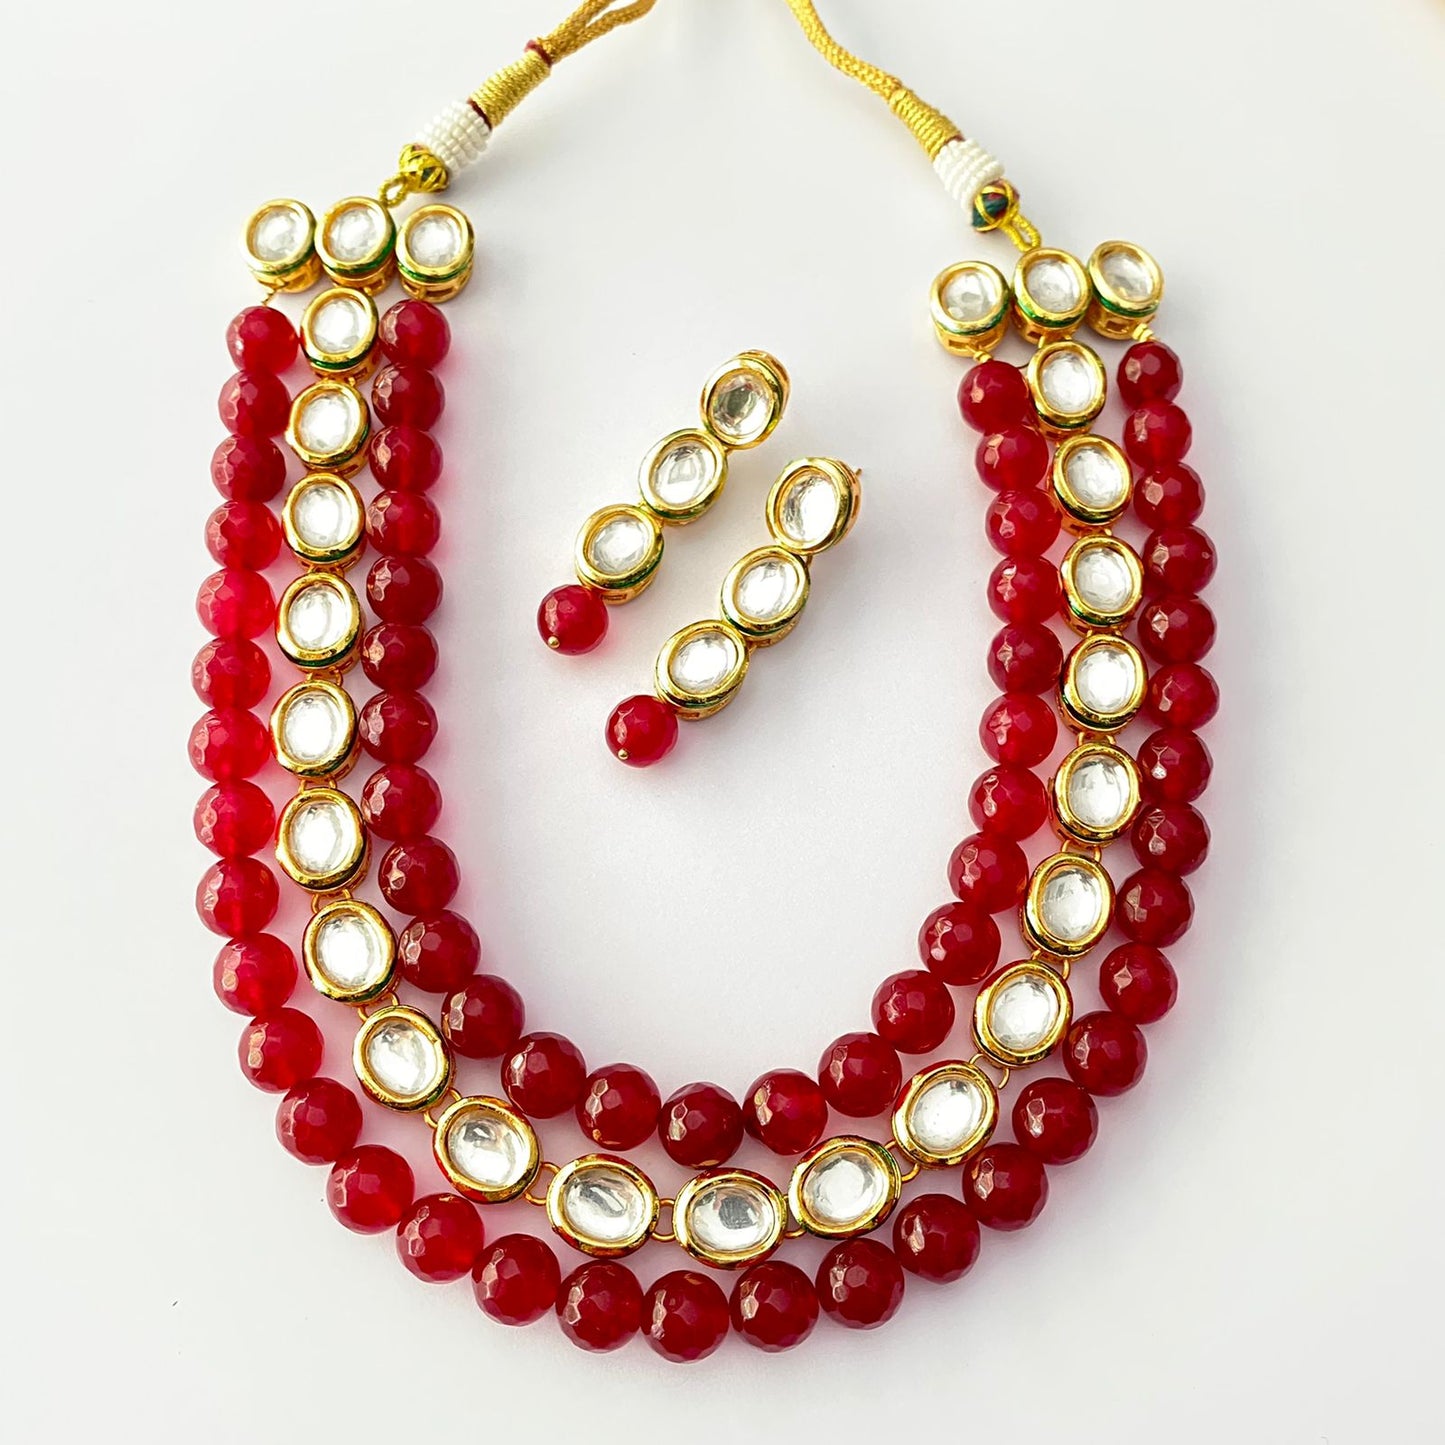 Red Stone Oval Kundan Hand Made Latest Design Necklace For Women.